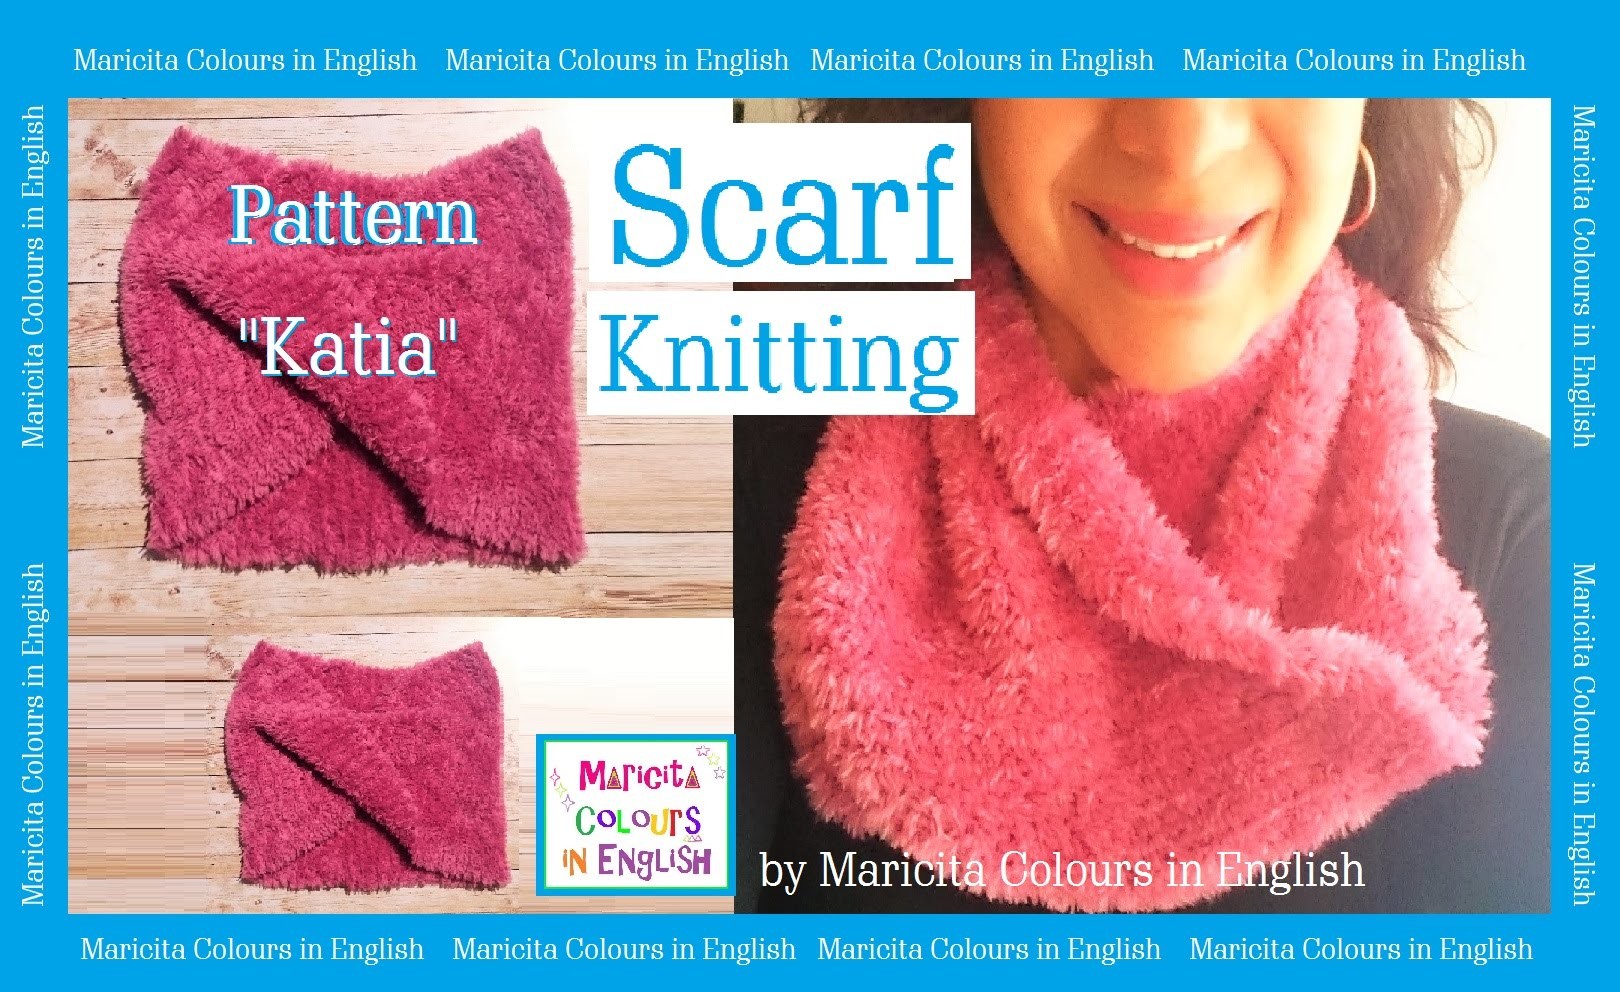 Knitting Cross Scarf Katia by Maricita Colours in English